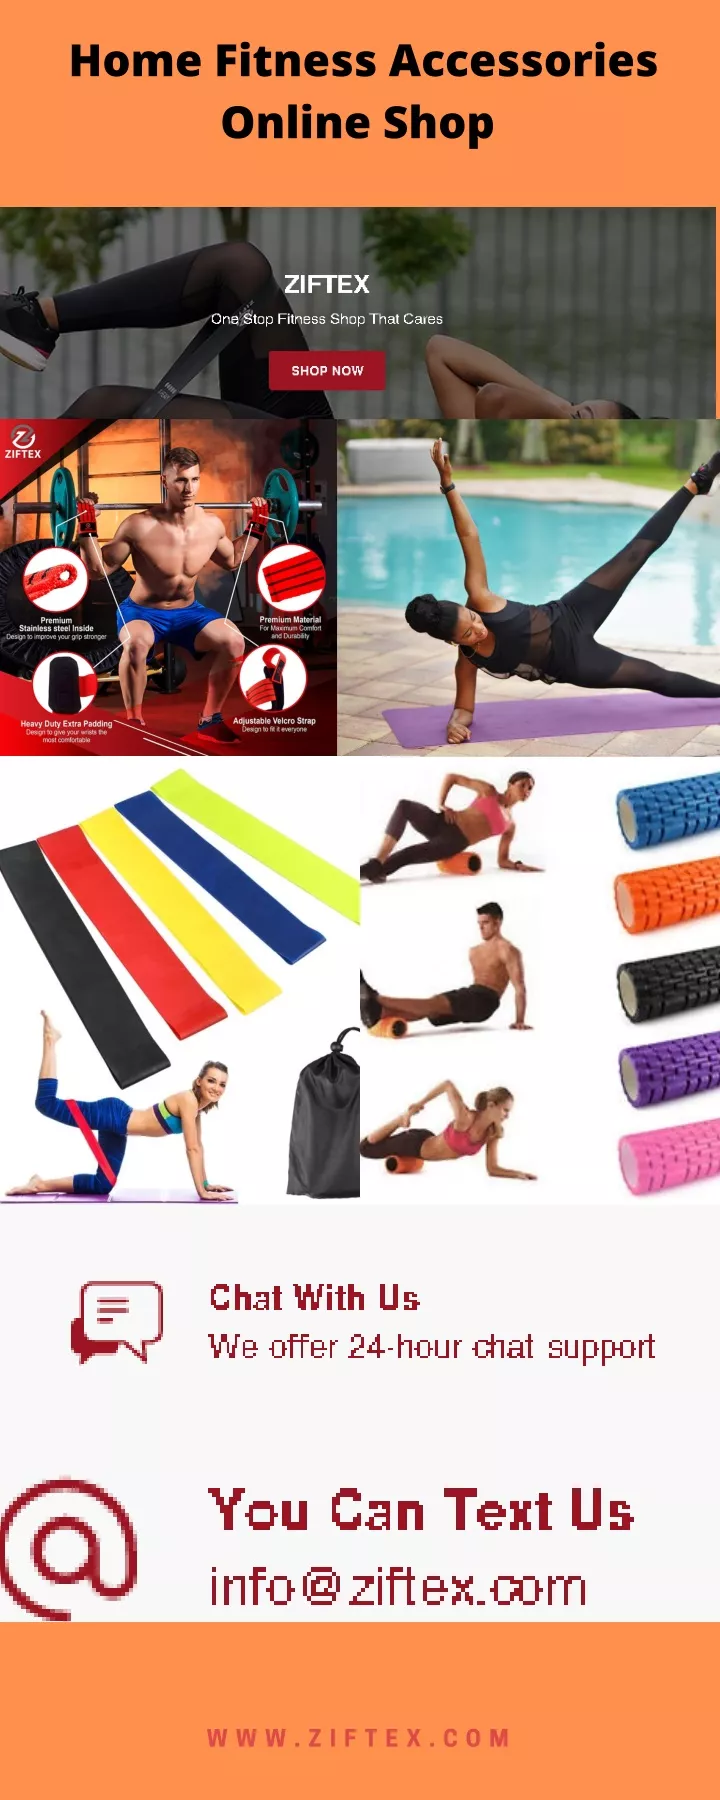 home fitness accessories online shop